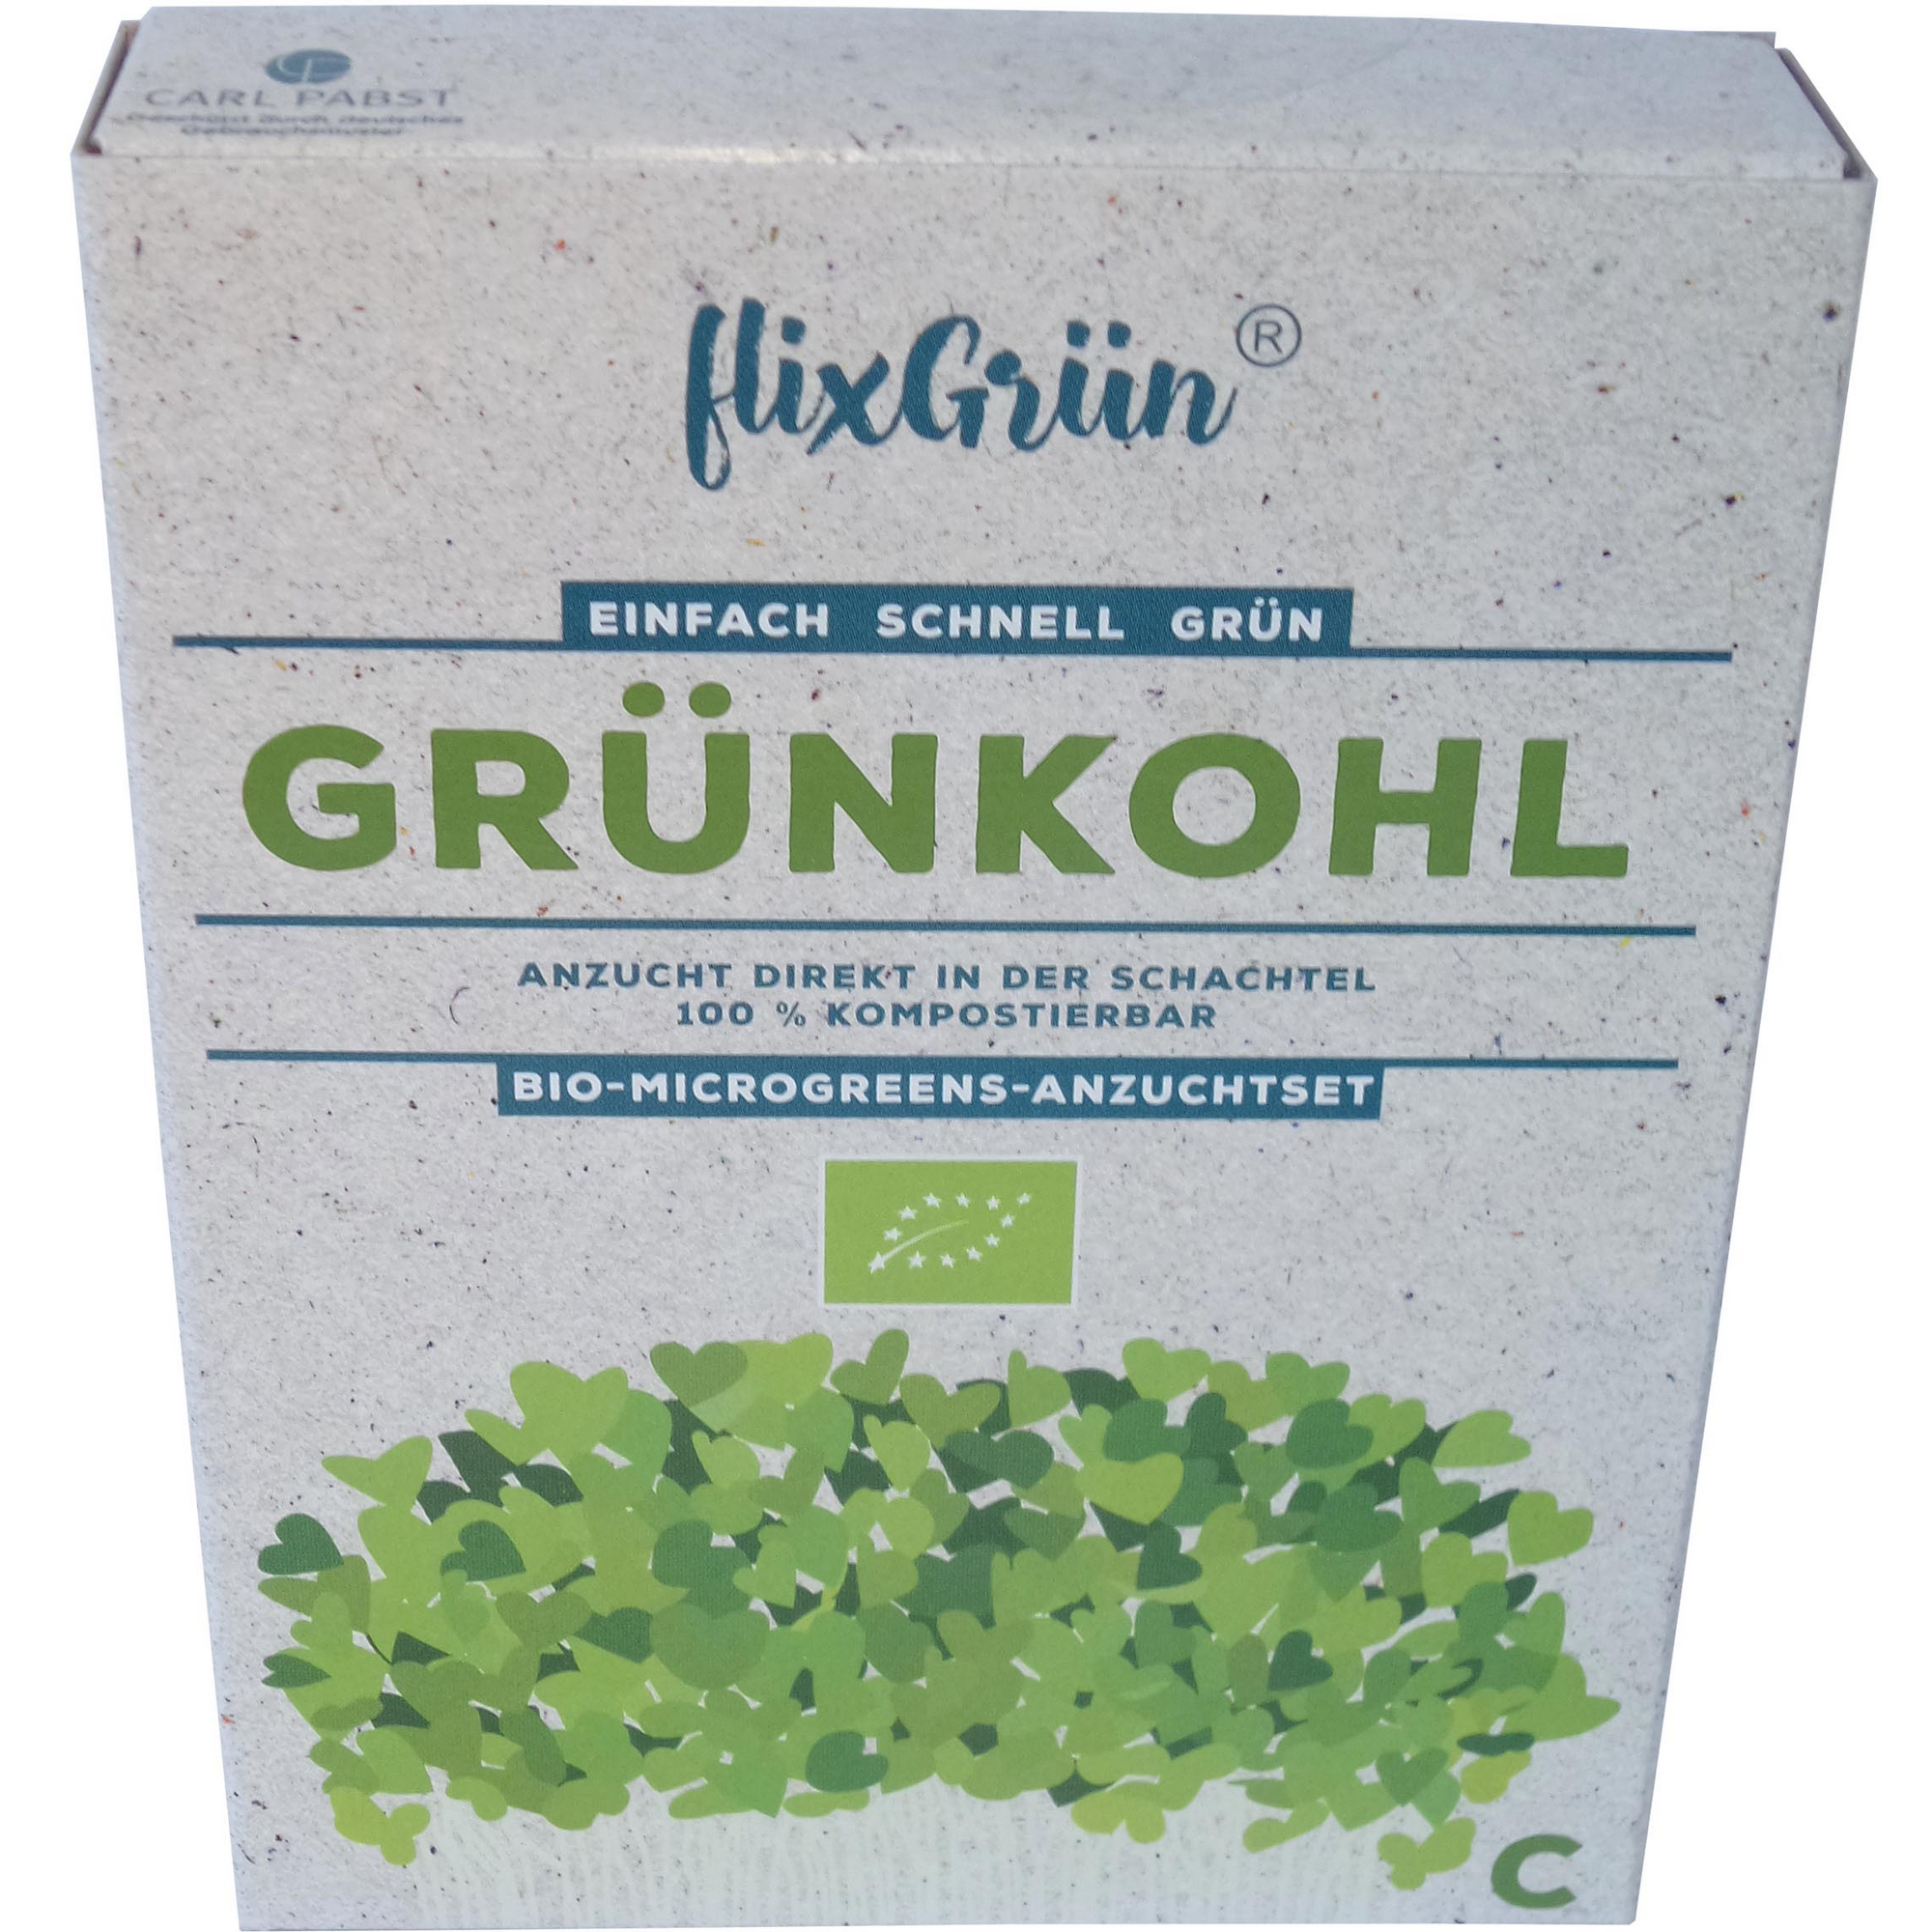 Anzuchtset - Microgreens + product picture